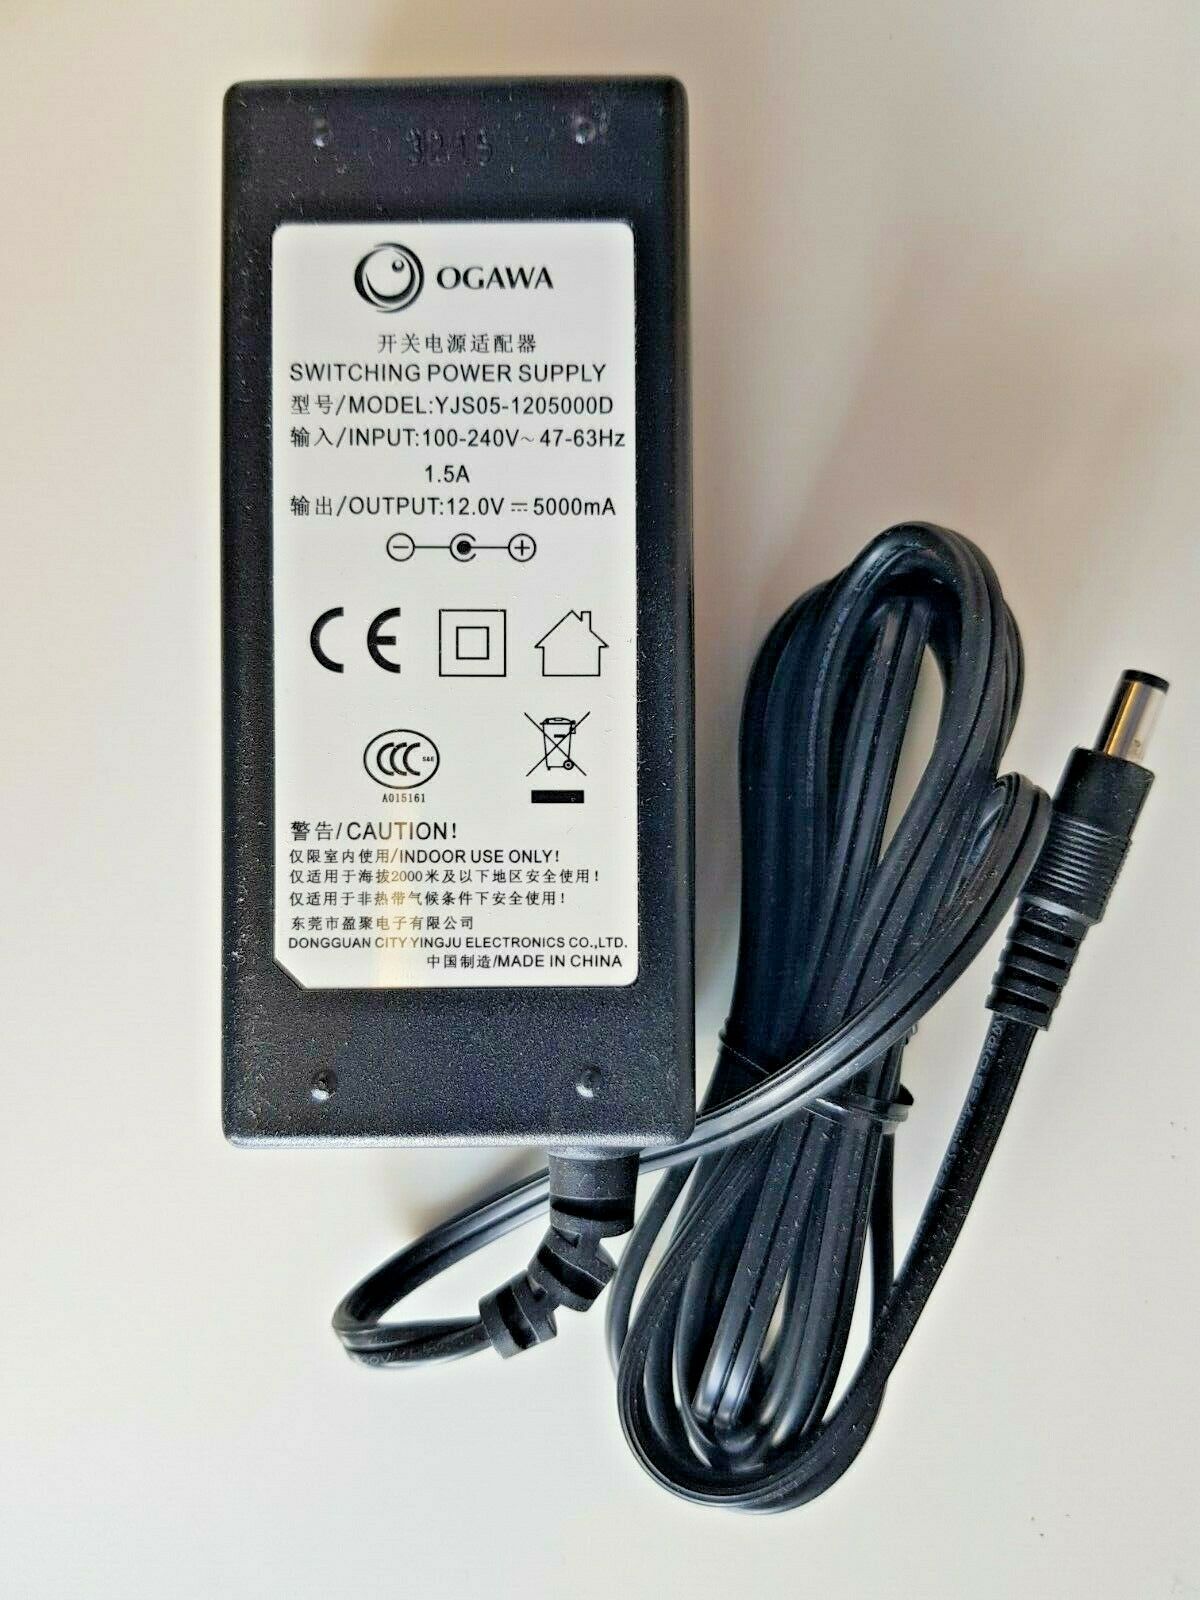 OGAWA 12.0V 5000mA Switching Power Supply Model YJS05-1205000D 12V 5A Output Current: 5A Manufacturer Warranty: 1 year